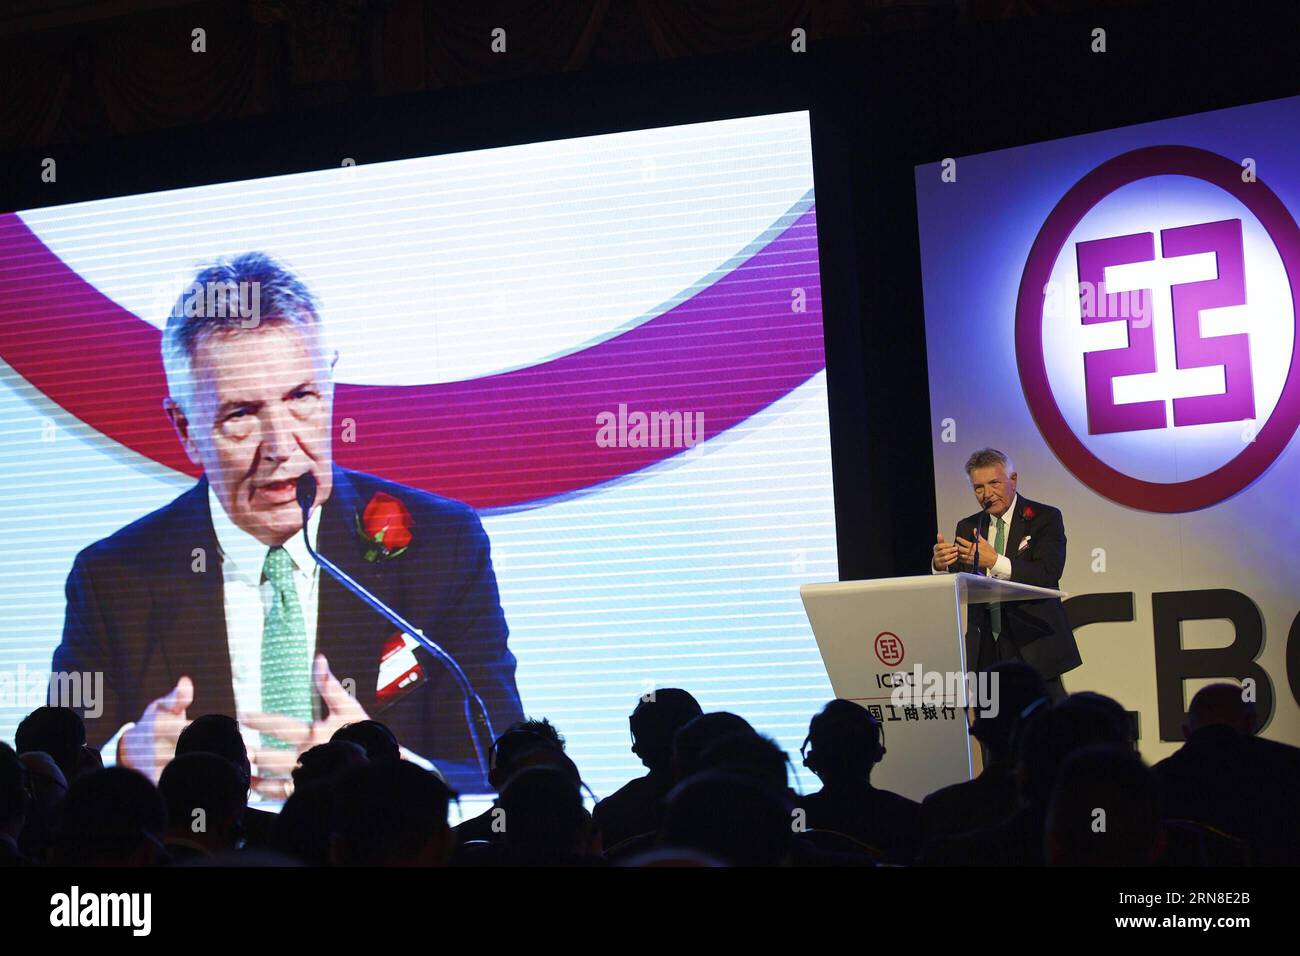 (151019) -- ROME, Oct. 19, 2015 -- Giancarlo Innocenzi Botti, president of Invitalia, speaks at the launching ceremony of the Industrial and Commercial Bank of China (ICBC) Rome Branch in Rome, Italy, on Oct. 19, 2015. This is ICBC s second branch in Italy after Milan Branch. ) (zw) ITALY-ROME-CHINA-ICBC-BANK JinxYu PUBLICATIONxNOTxINxCHN   Rome OCT 19 2015 Gian Carlo Innocenzi Botti President of  Speaks AT The Launching Ceremony of The Industrial and Commercial Bank of China ICBC Rome Branch in Rome Italy ON OCT 19 2015 This IS ICBC S Second Branch in Italy After Milan Branch ZW Italy Rome Ch Stock Photo